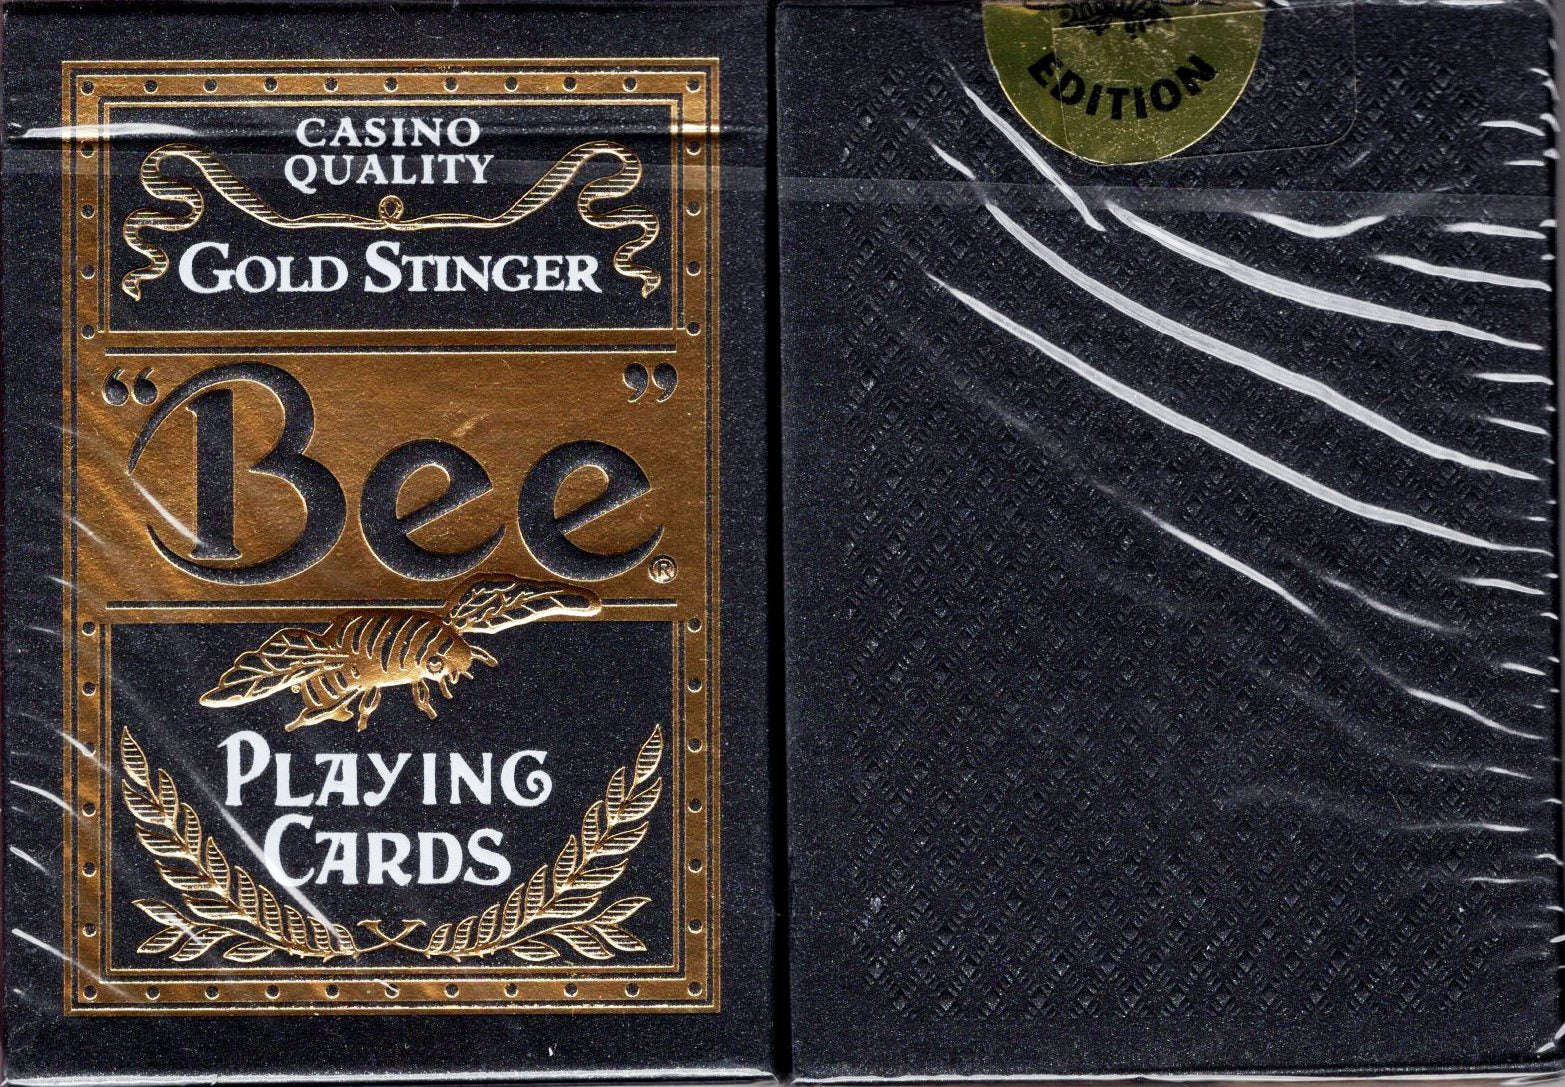 PlayingCardDecks.com-Bee Gold Stinger Playing Cards